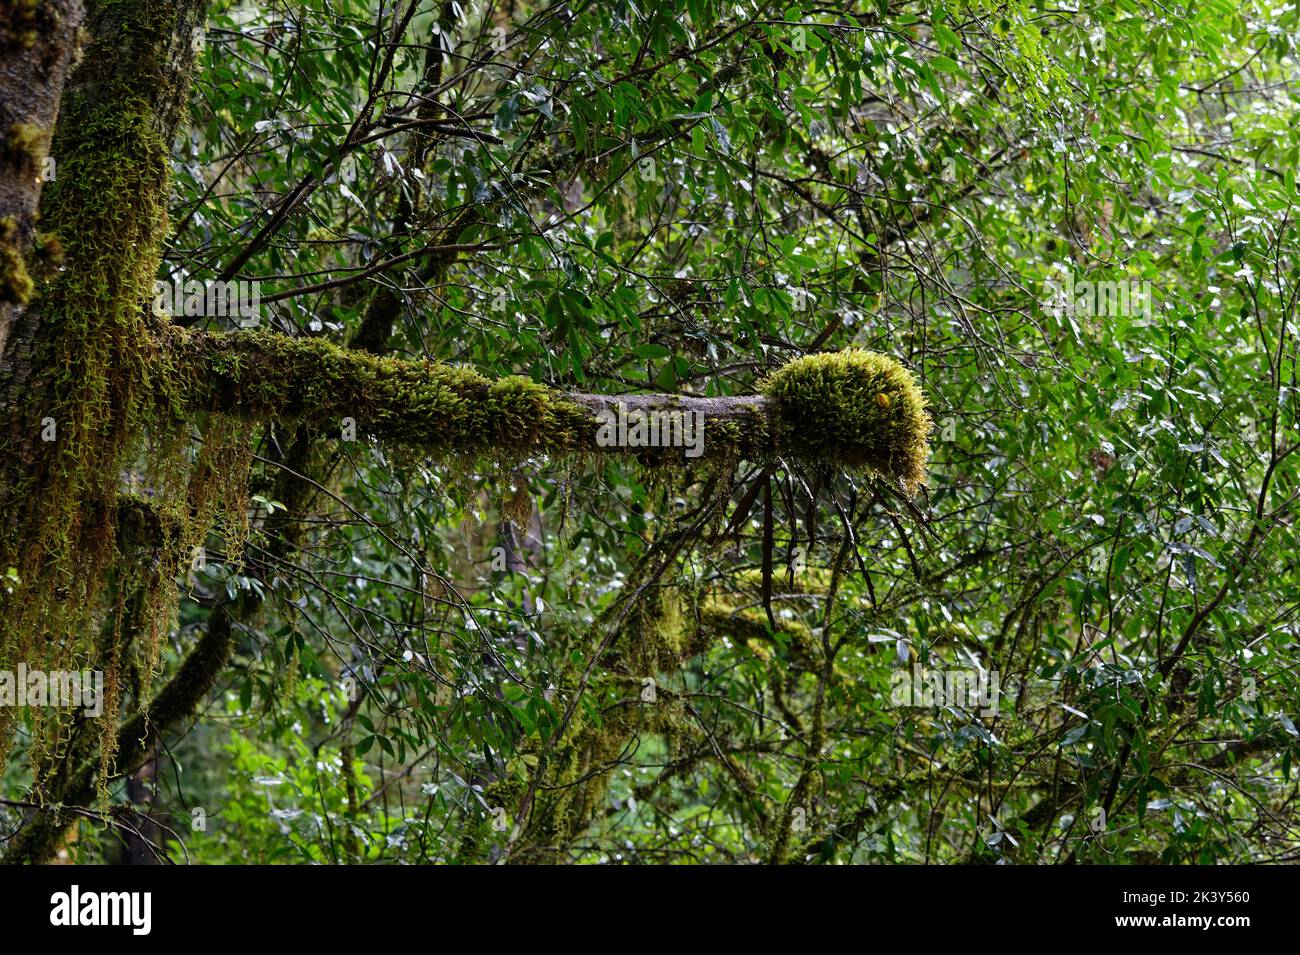 Thick moss covers a tree branch, it has a knobbly end Stock Photo